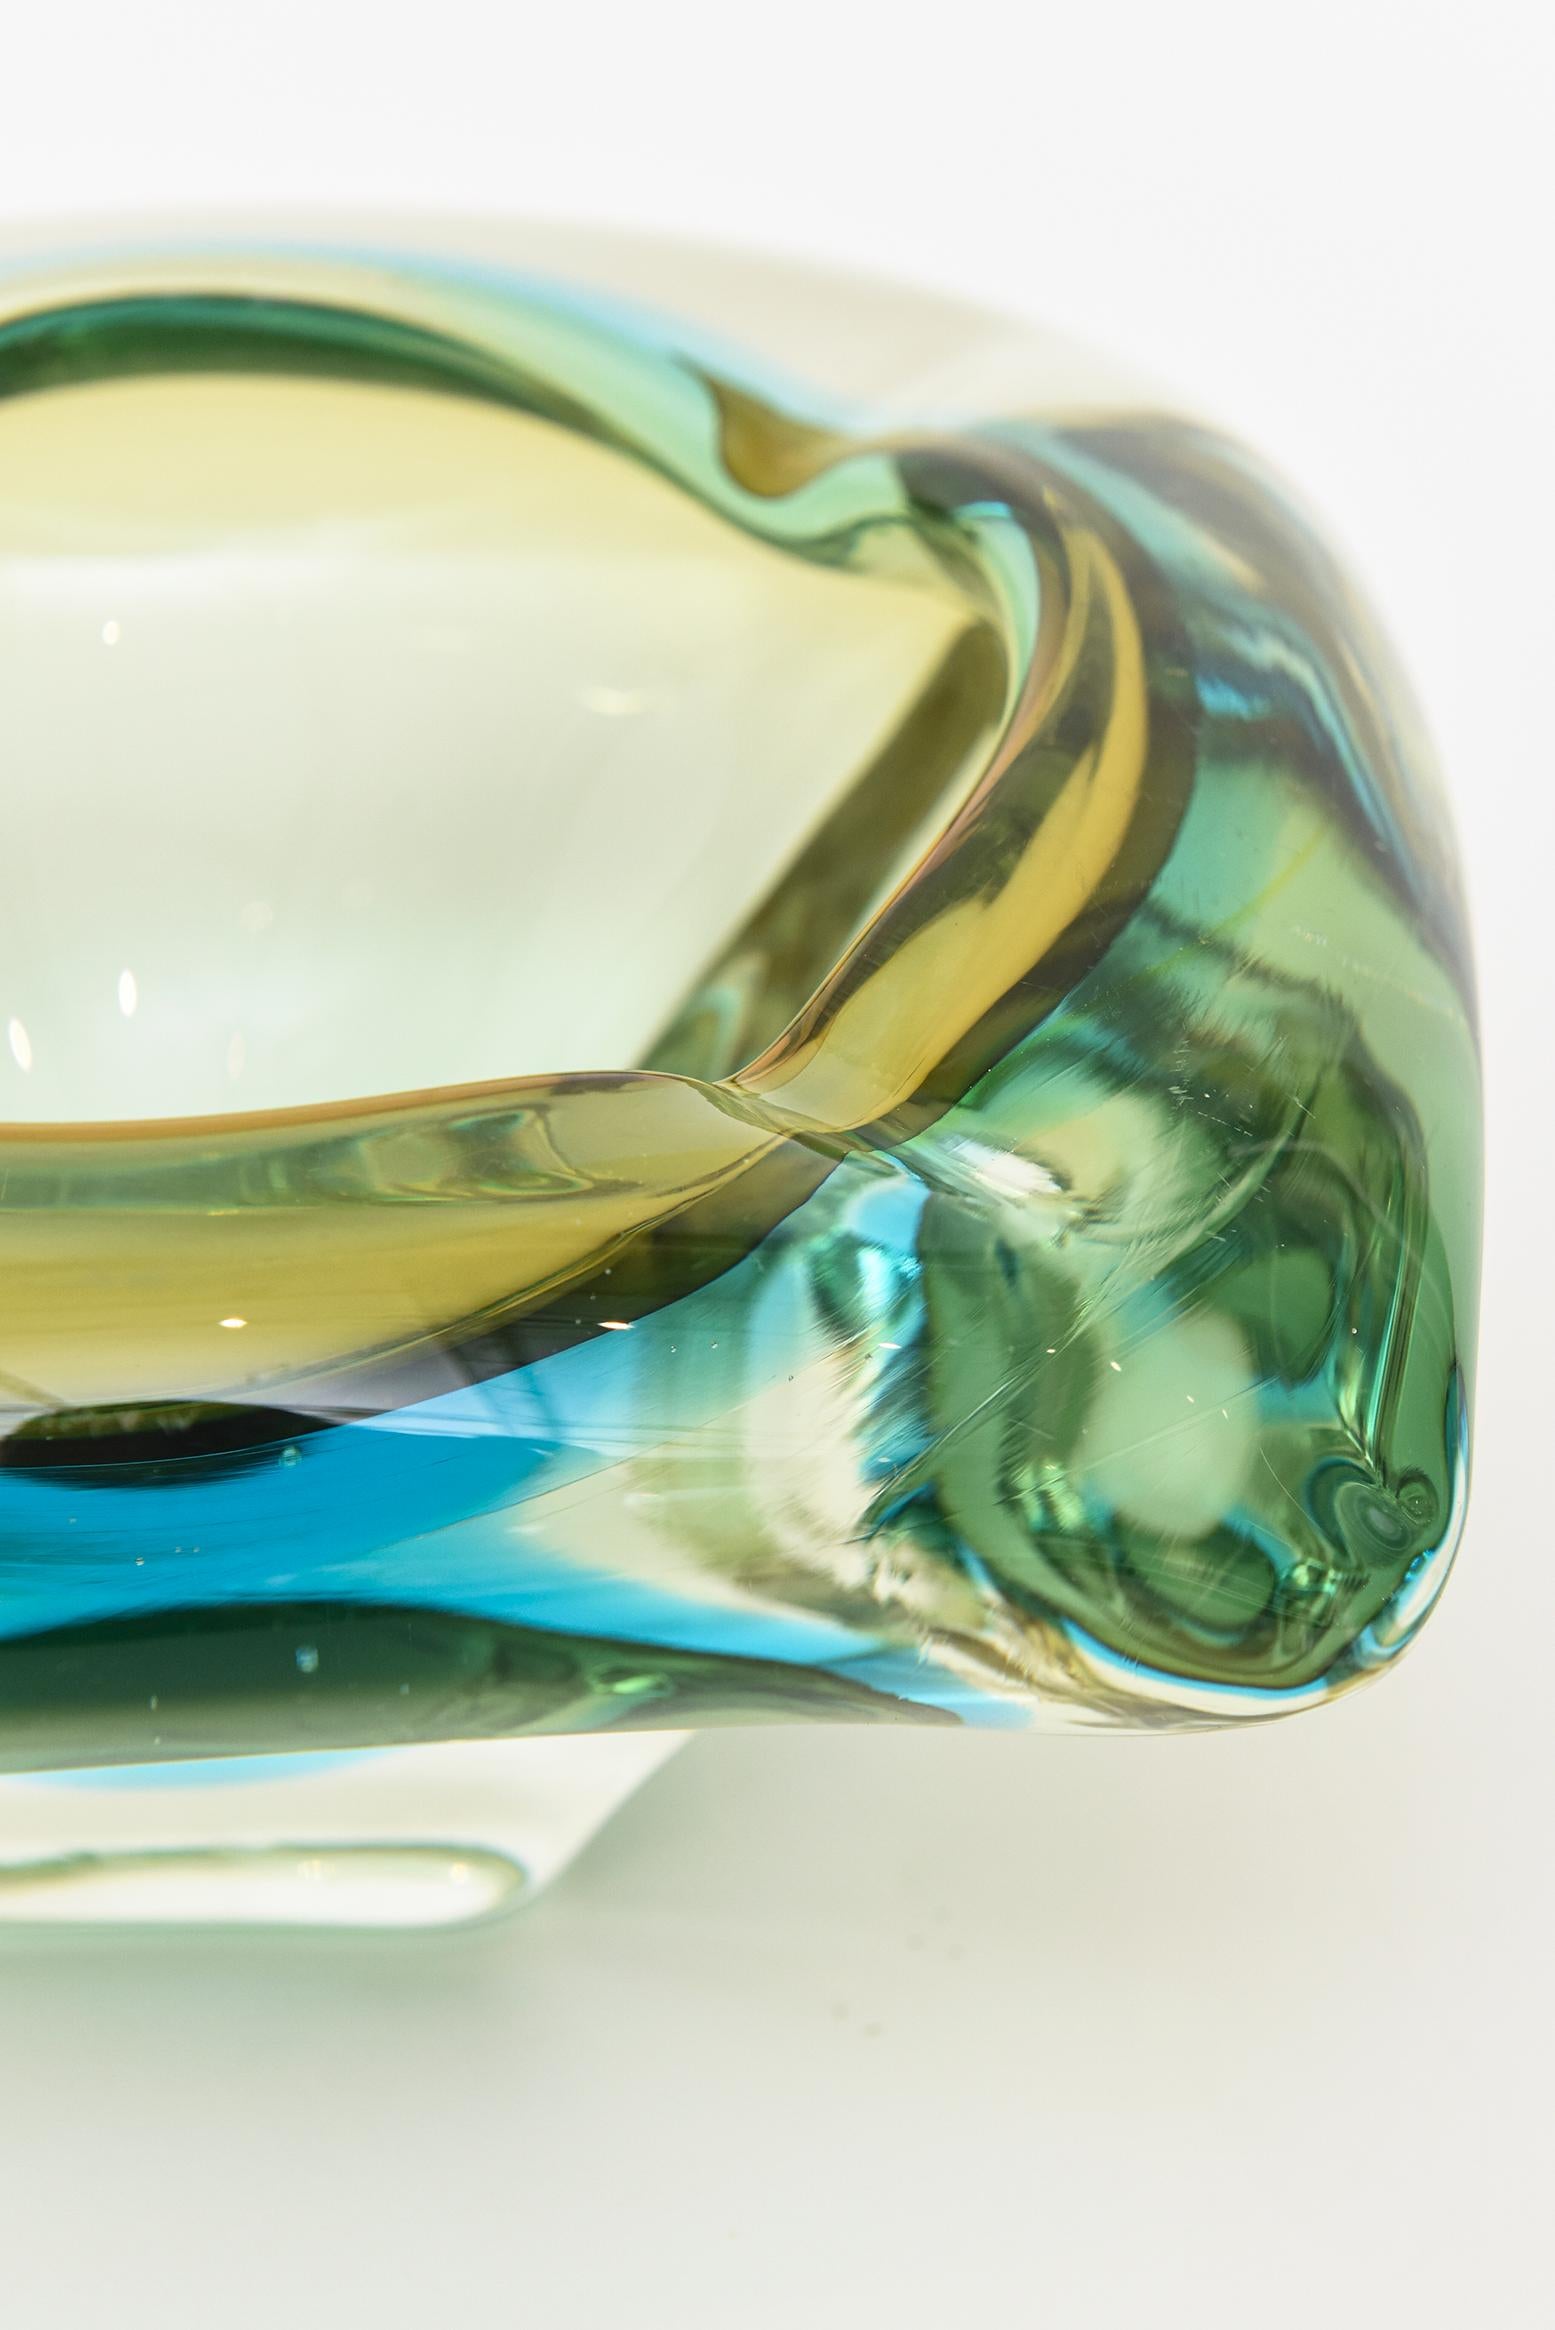 Modern Flavio Poli Vintage Murano Sommerso Turquoise and Green Glass Bowl Or Ashtray For Sale